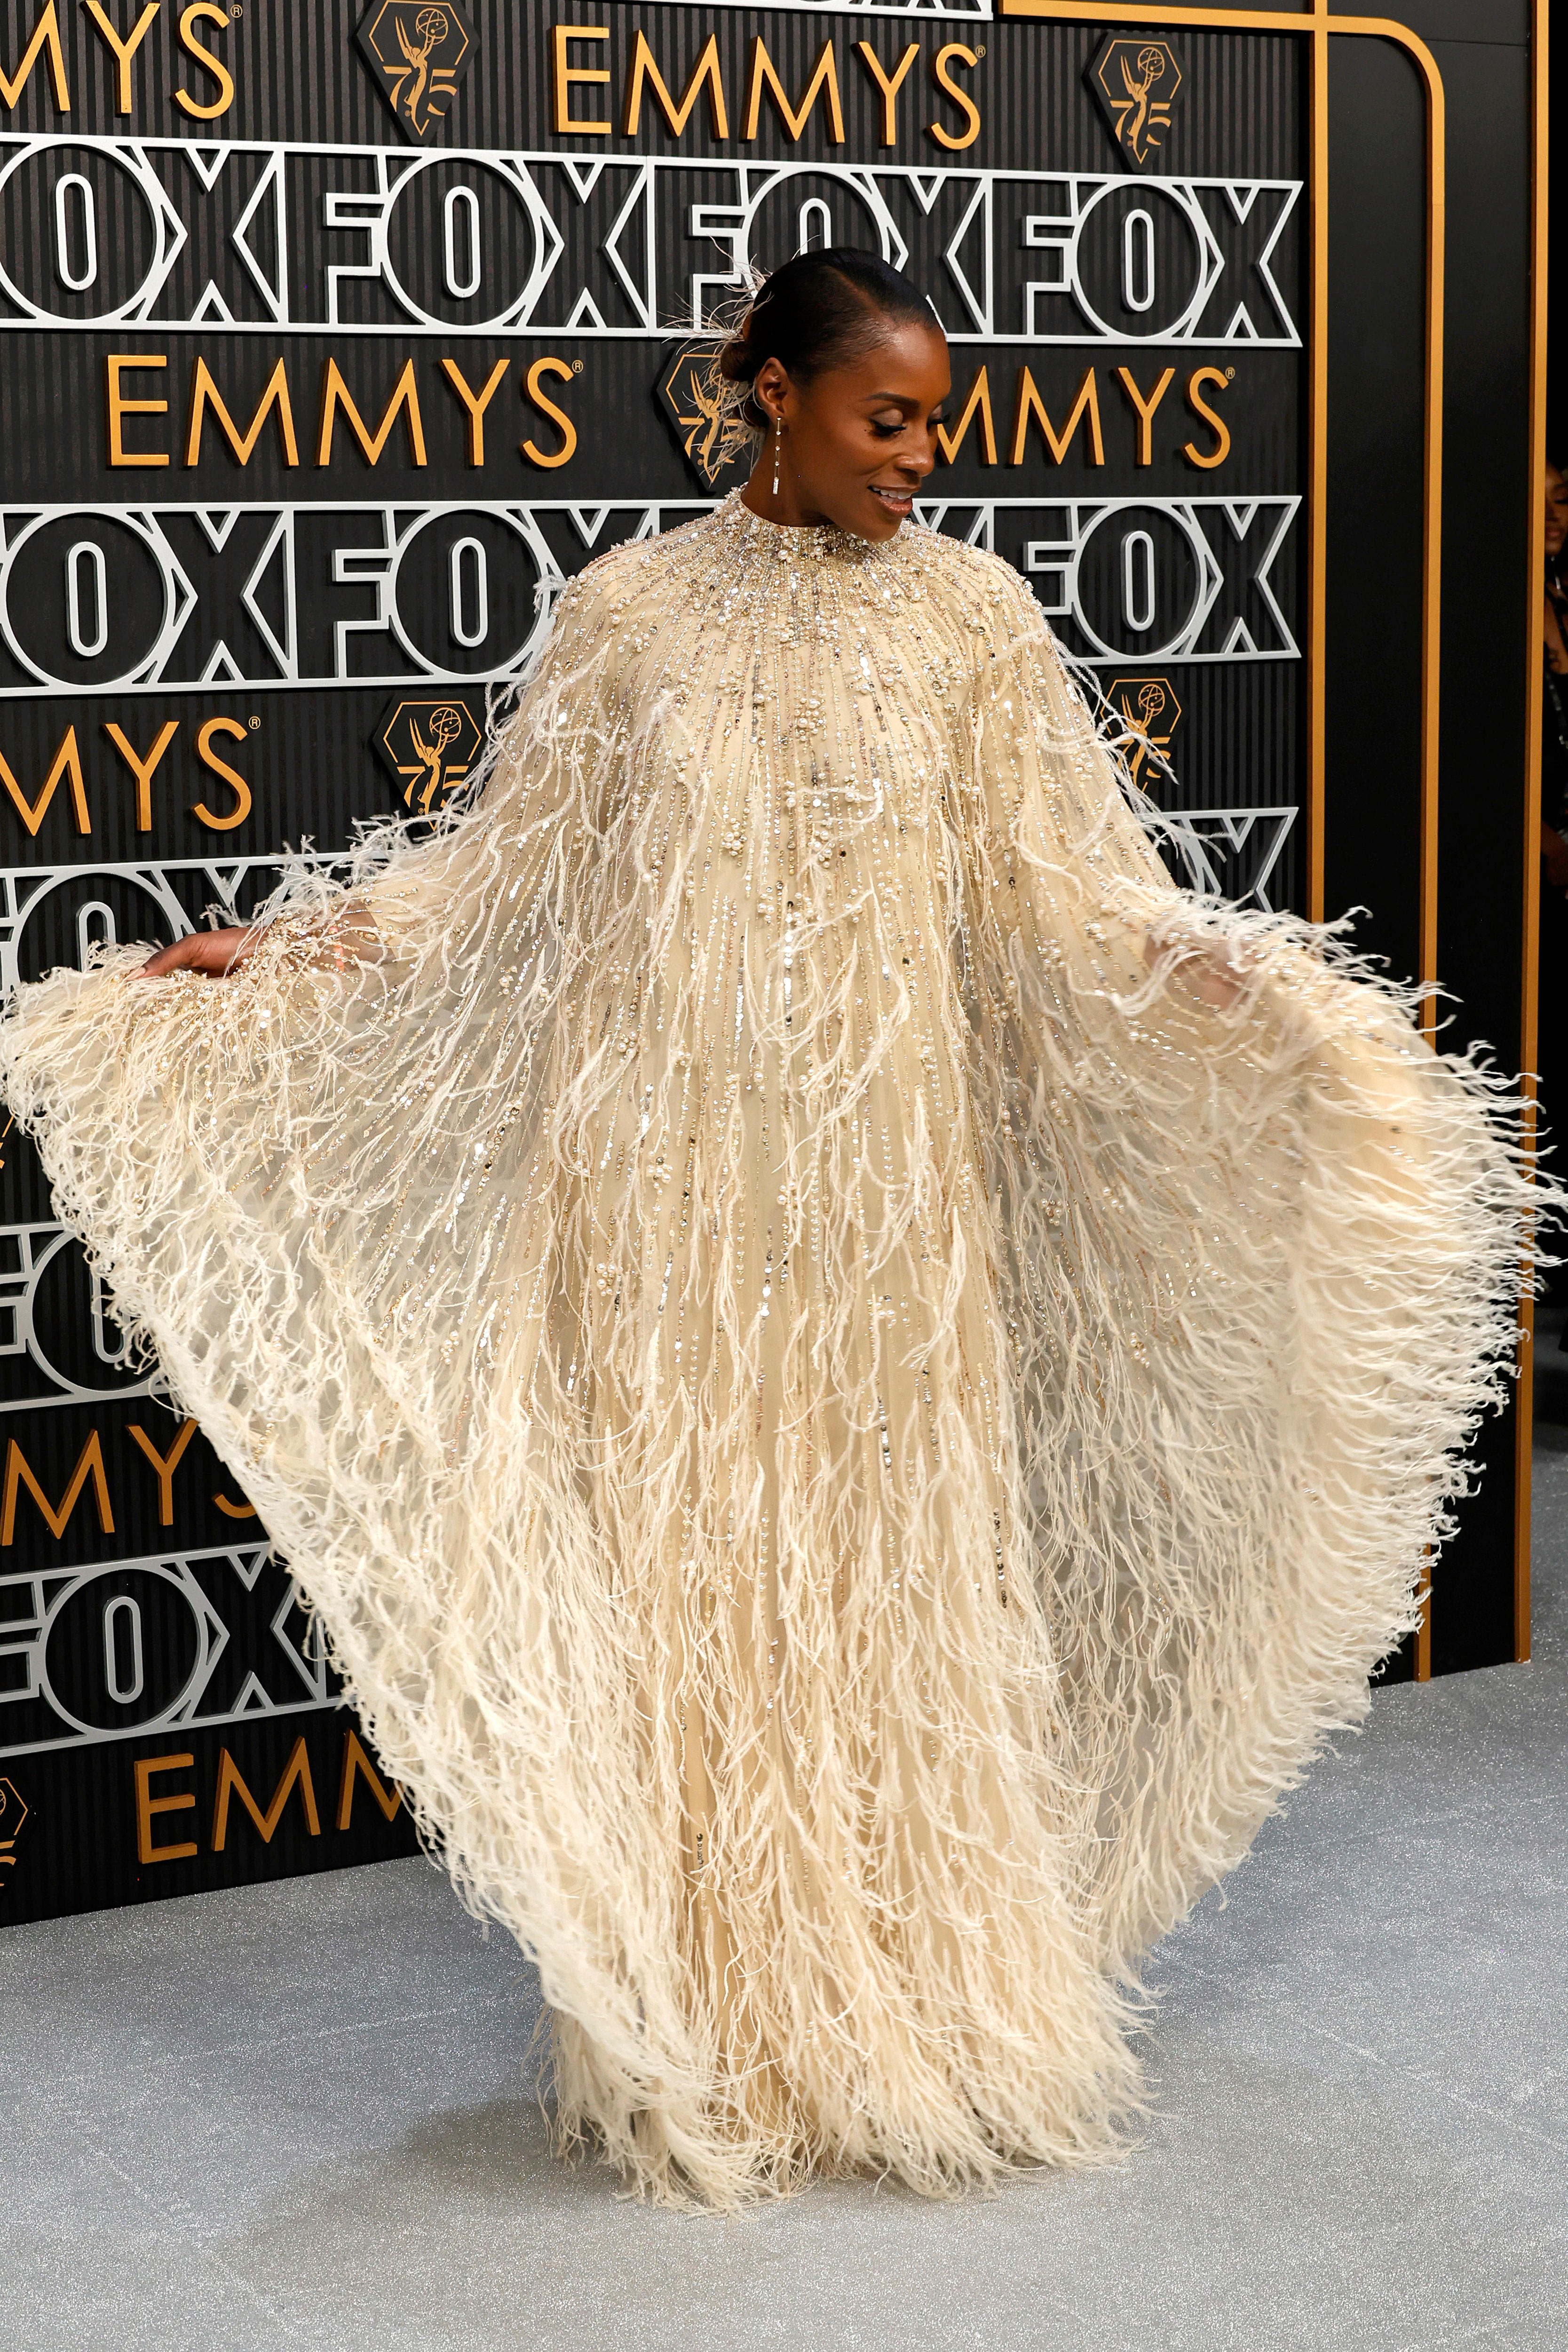 A woman in a white feathered dress on a red carpet.